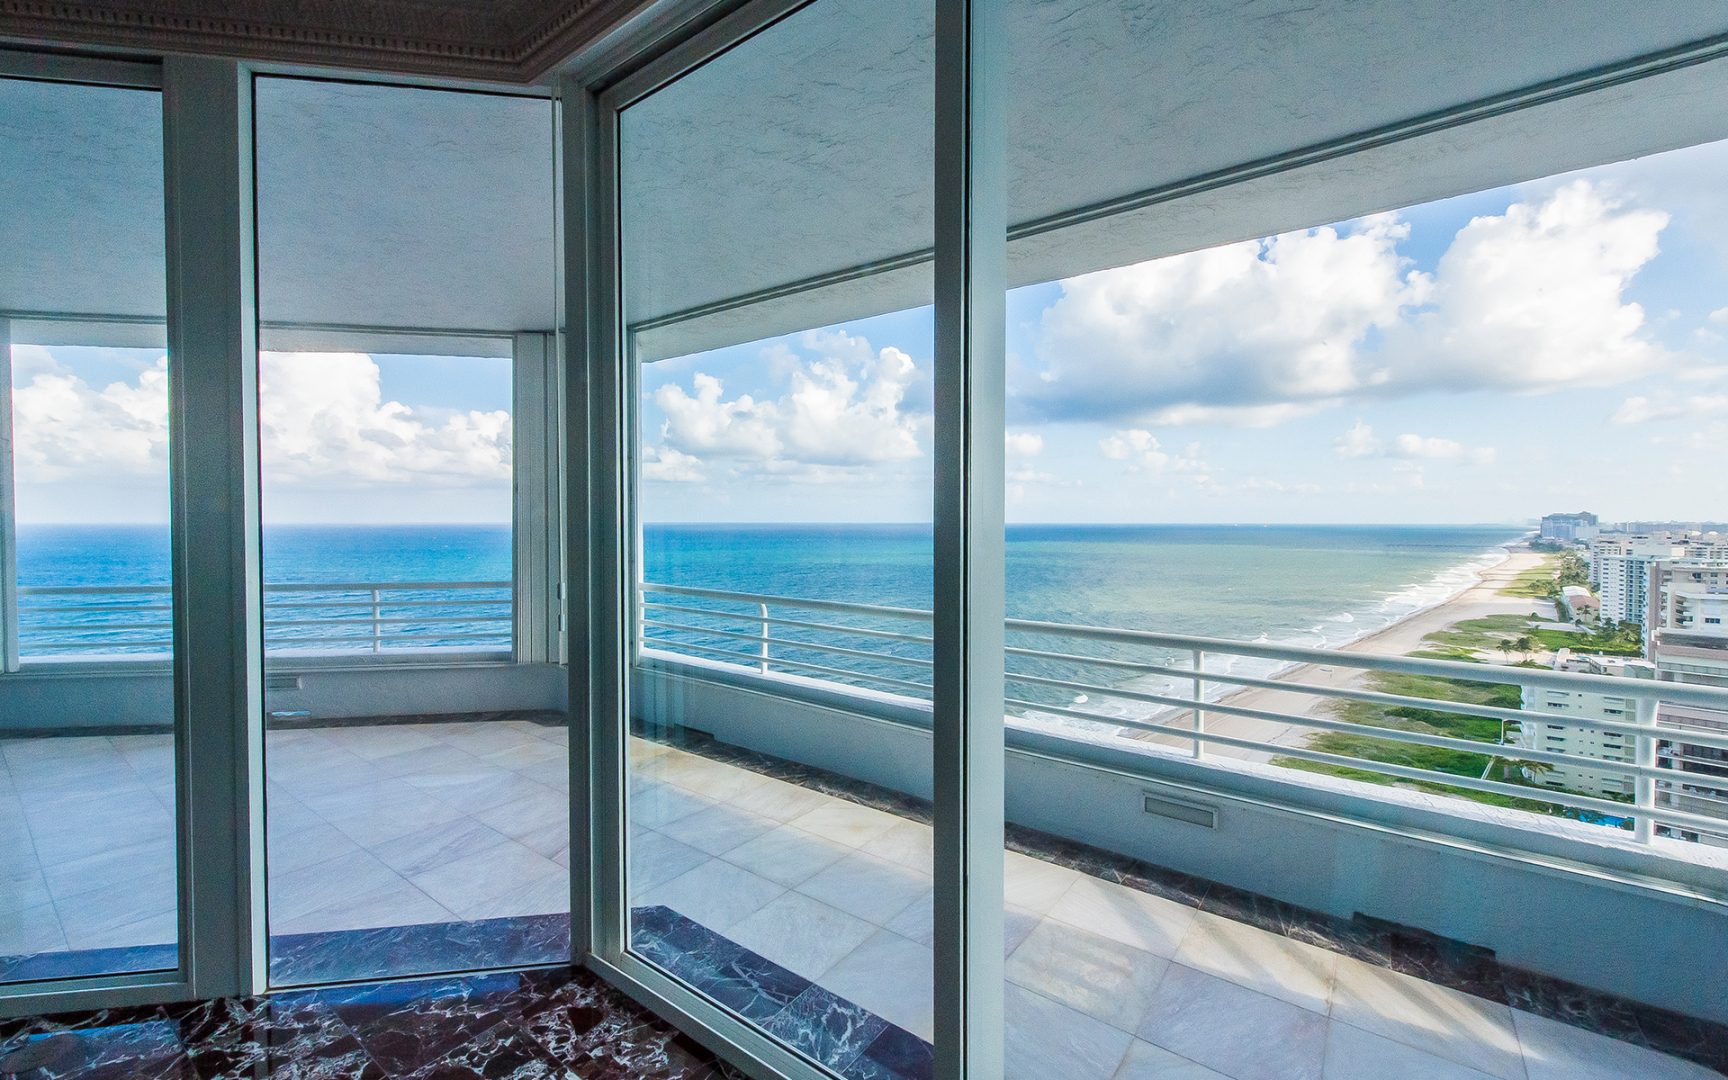 Residence PH at Cristelle 1700 S Ocean Blvd. Lauderdale By The Sea, Florida 33062